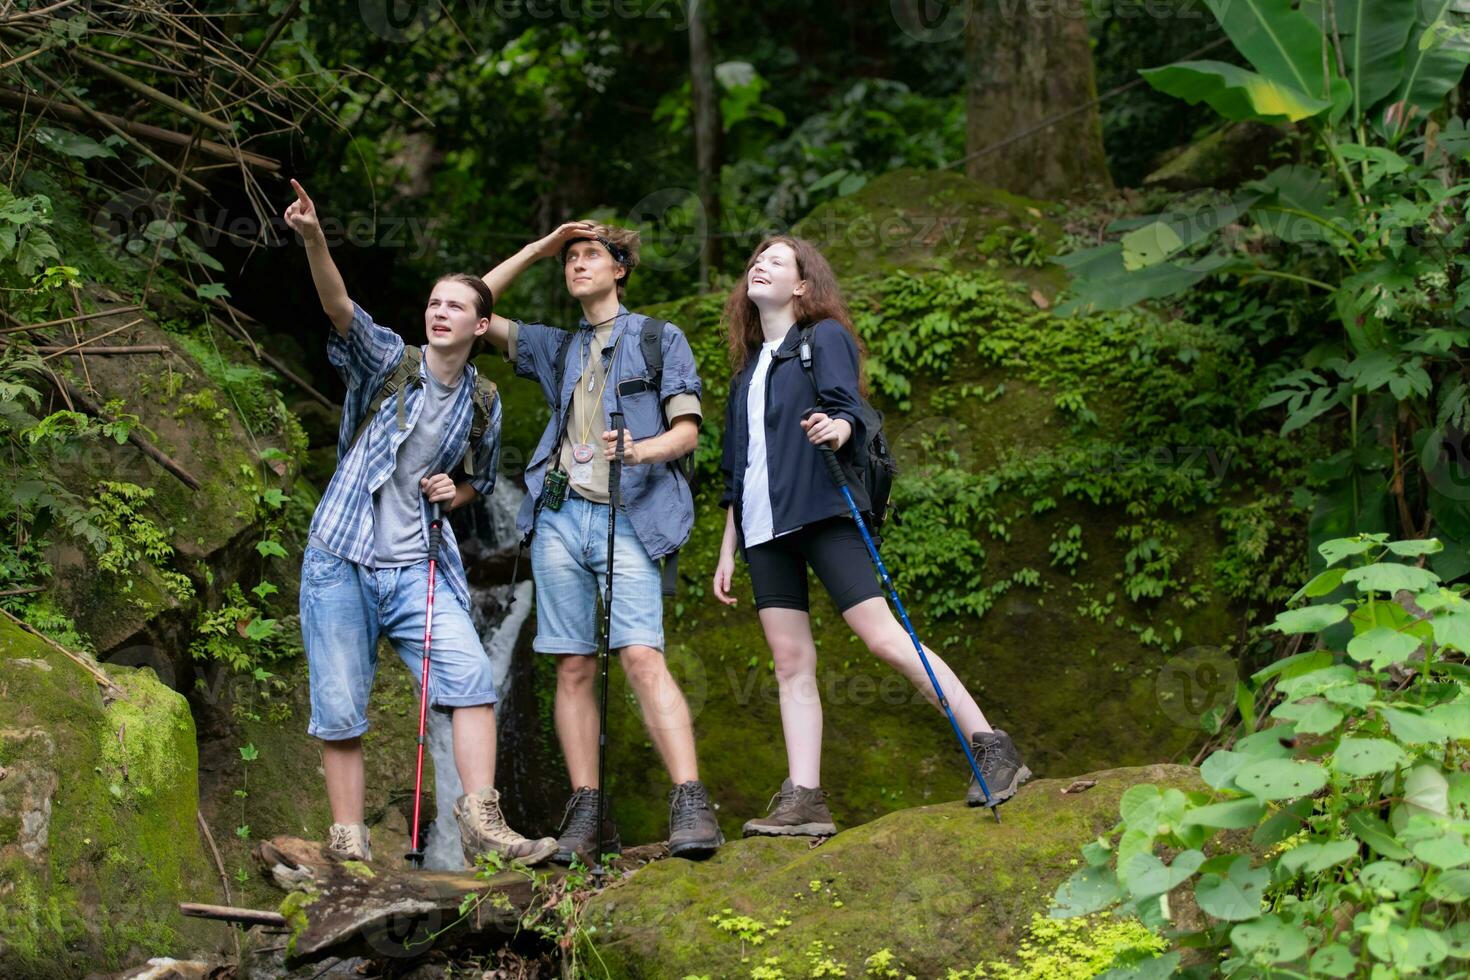 Group of young people hiking in the forest. Travel and adventure concept. photo